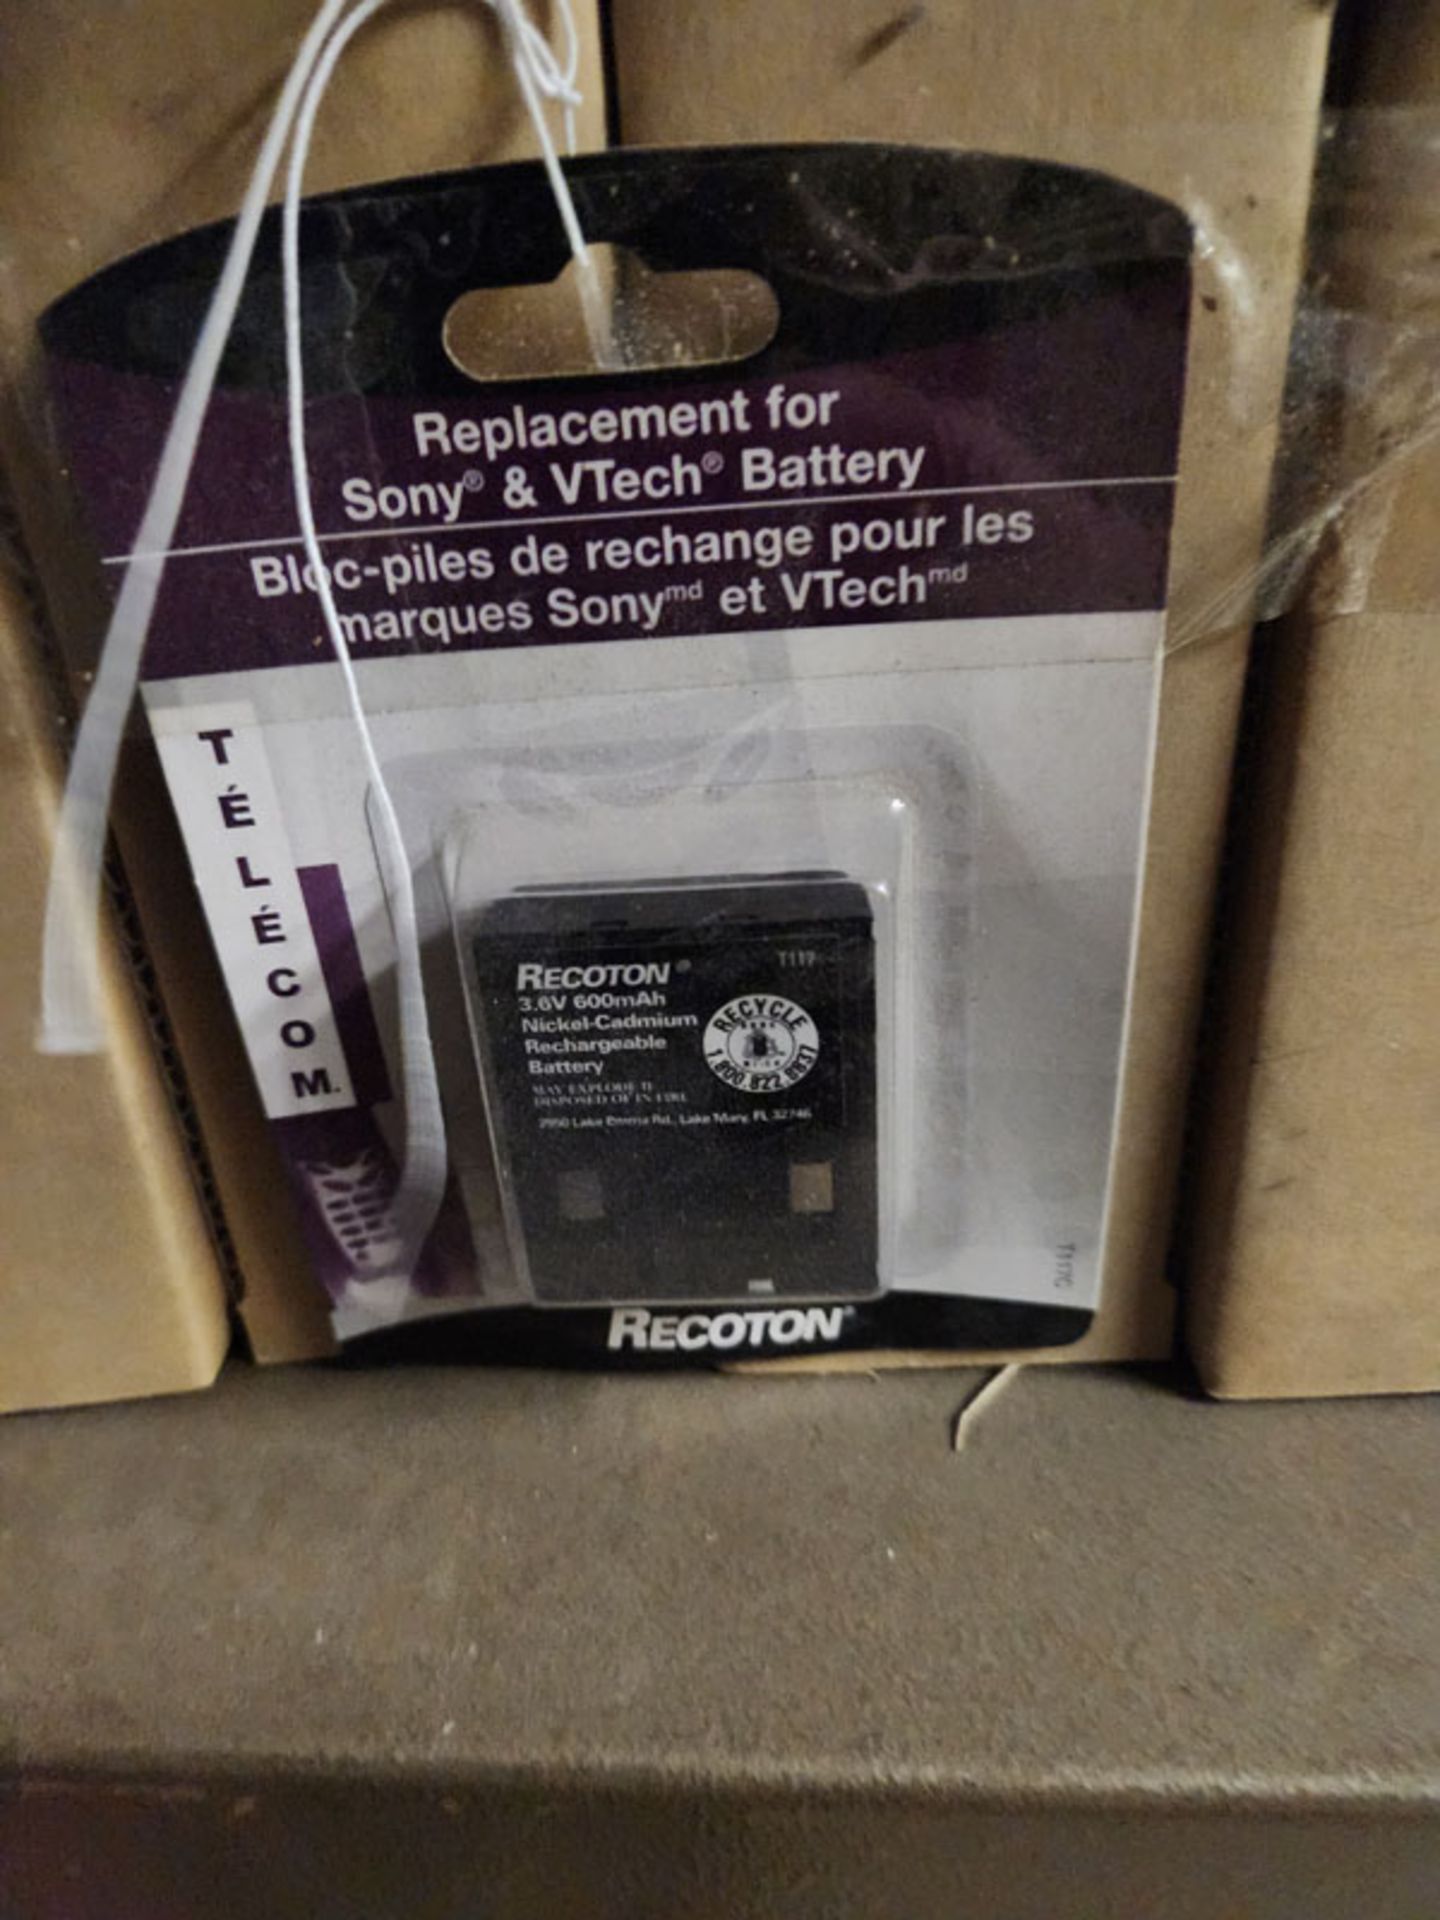 4 BOXES OF RECOTON REPLACEMENT BATTERY T117C FOR SONY AND VTECH - Image 2 of 2